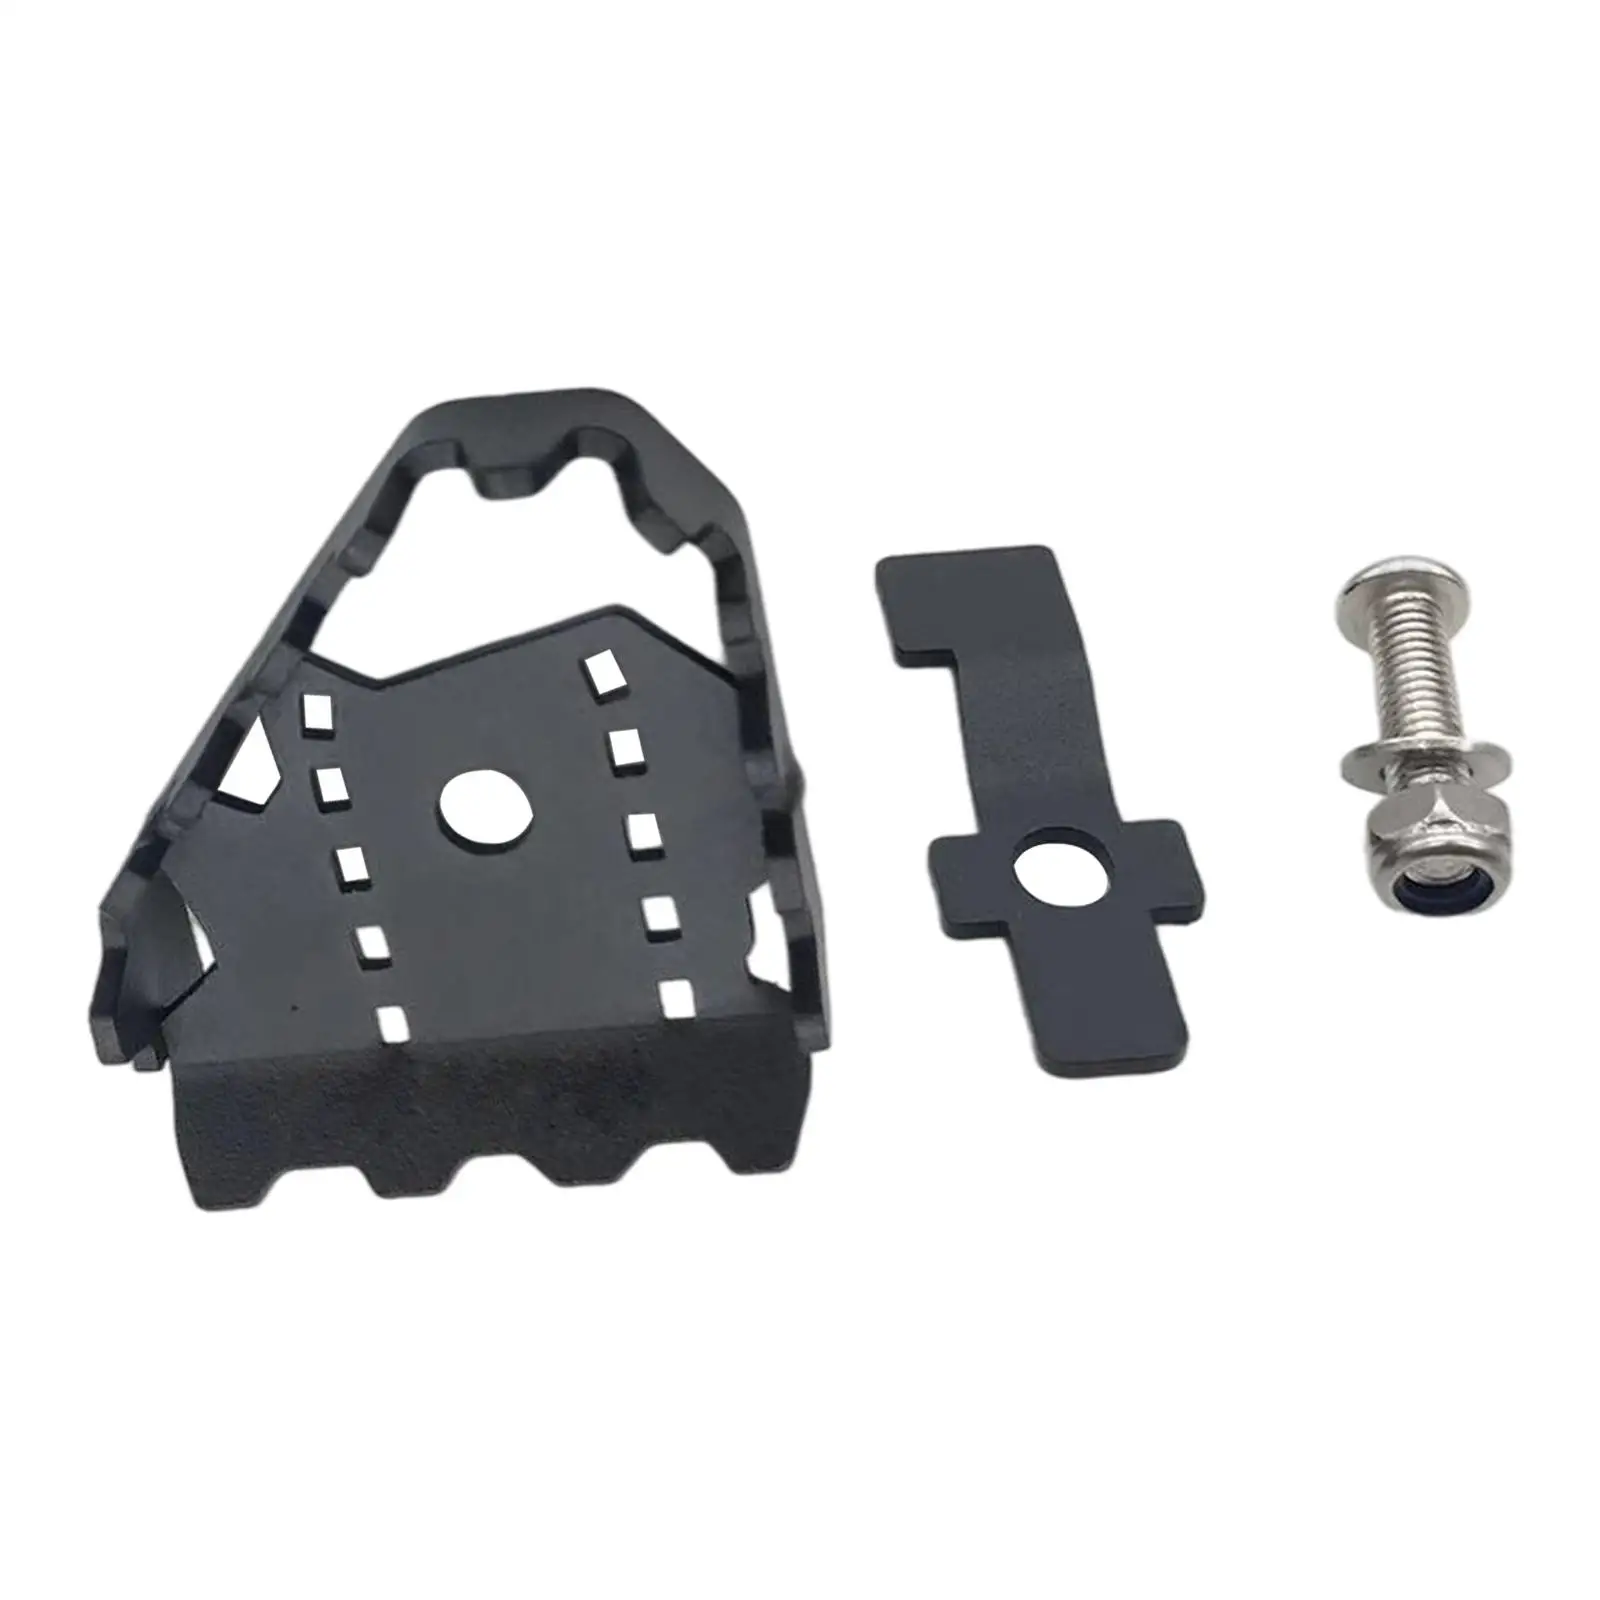 Motorcycle Brake Pedal Extension Step Tip Plate Good Replacement  TENERE700 XTZ700 2019-2021, Non- Modification Adapter Parts